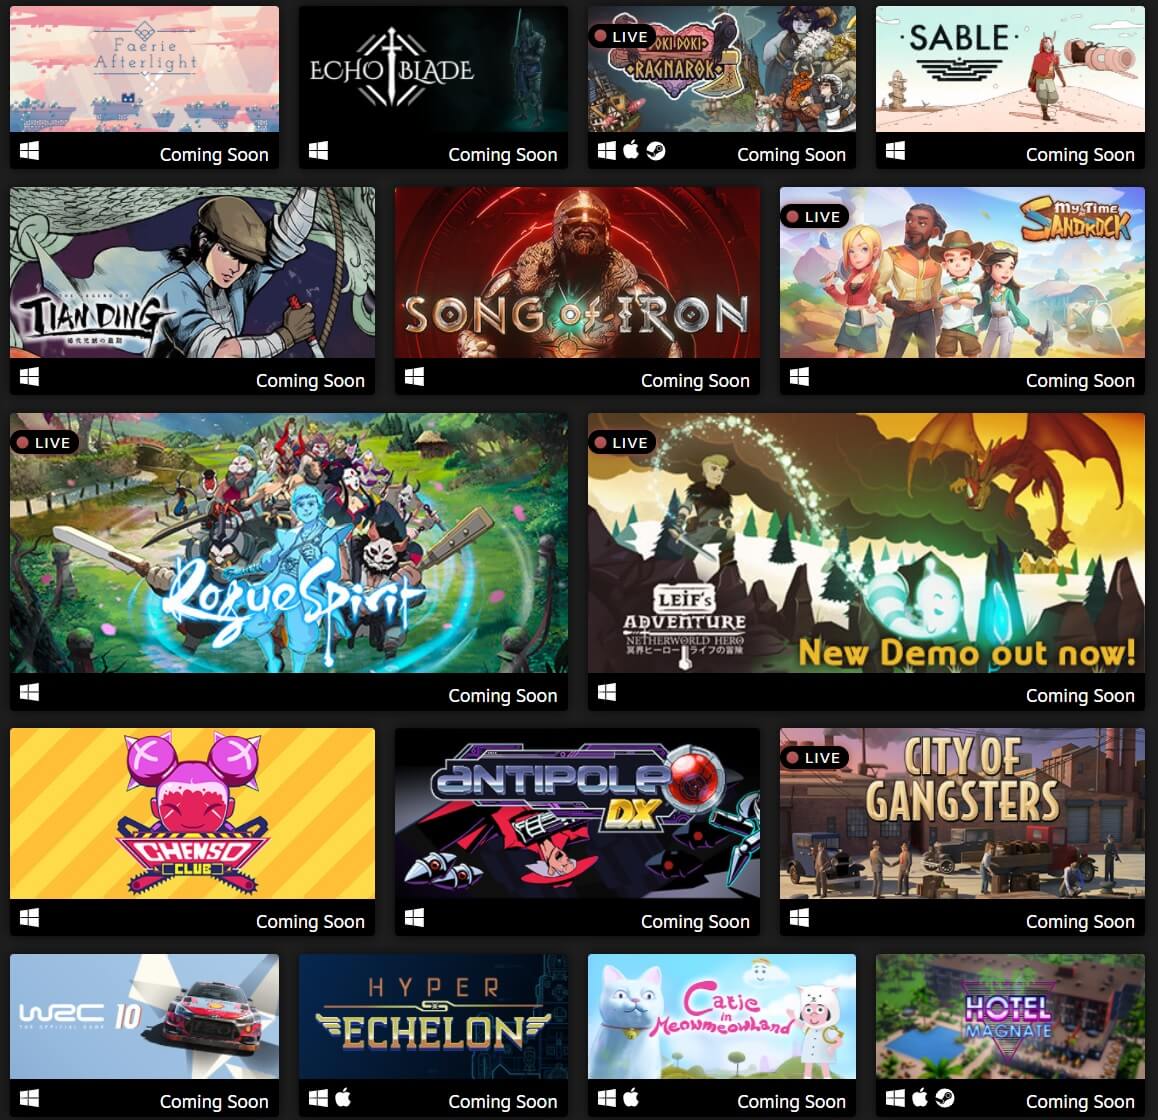 Steam's latest 'Game Festival' event offers up 59 free indie game demos